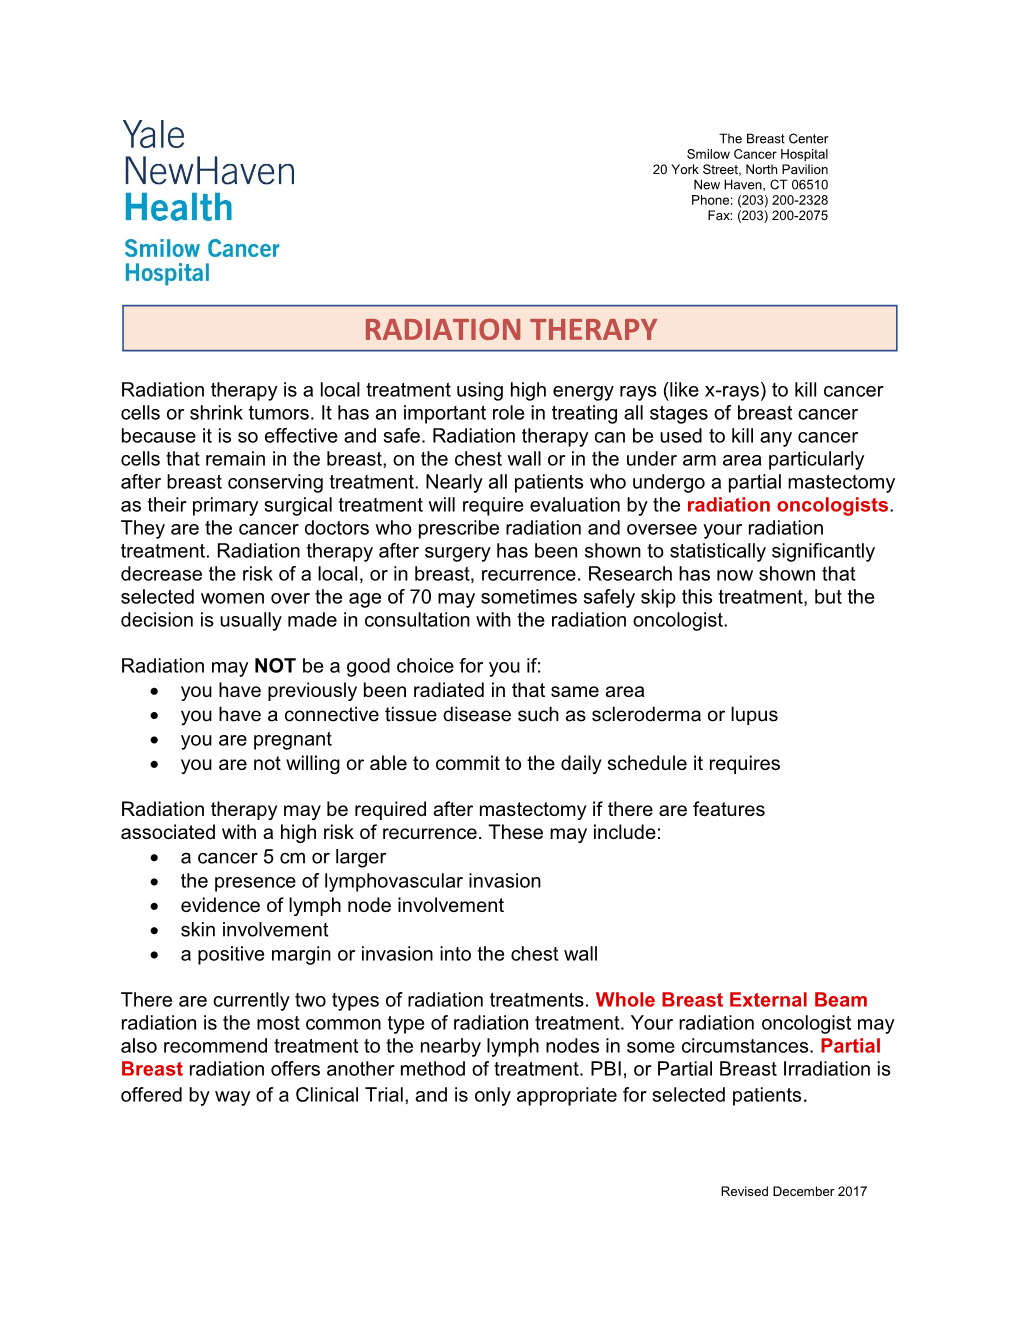 Radiation Therapy and Breast Cancer